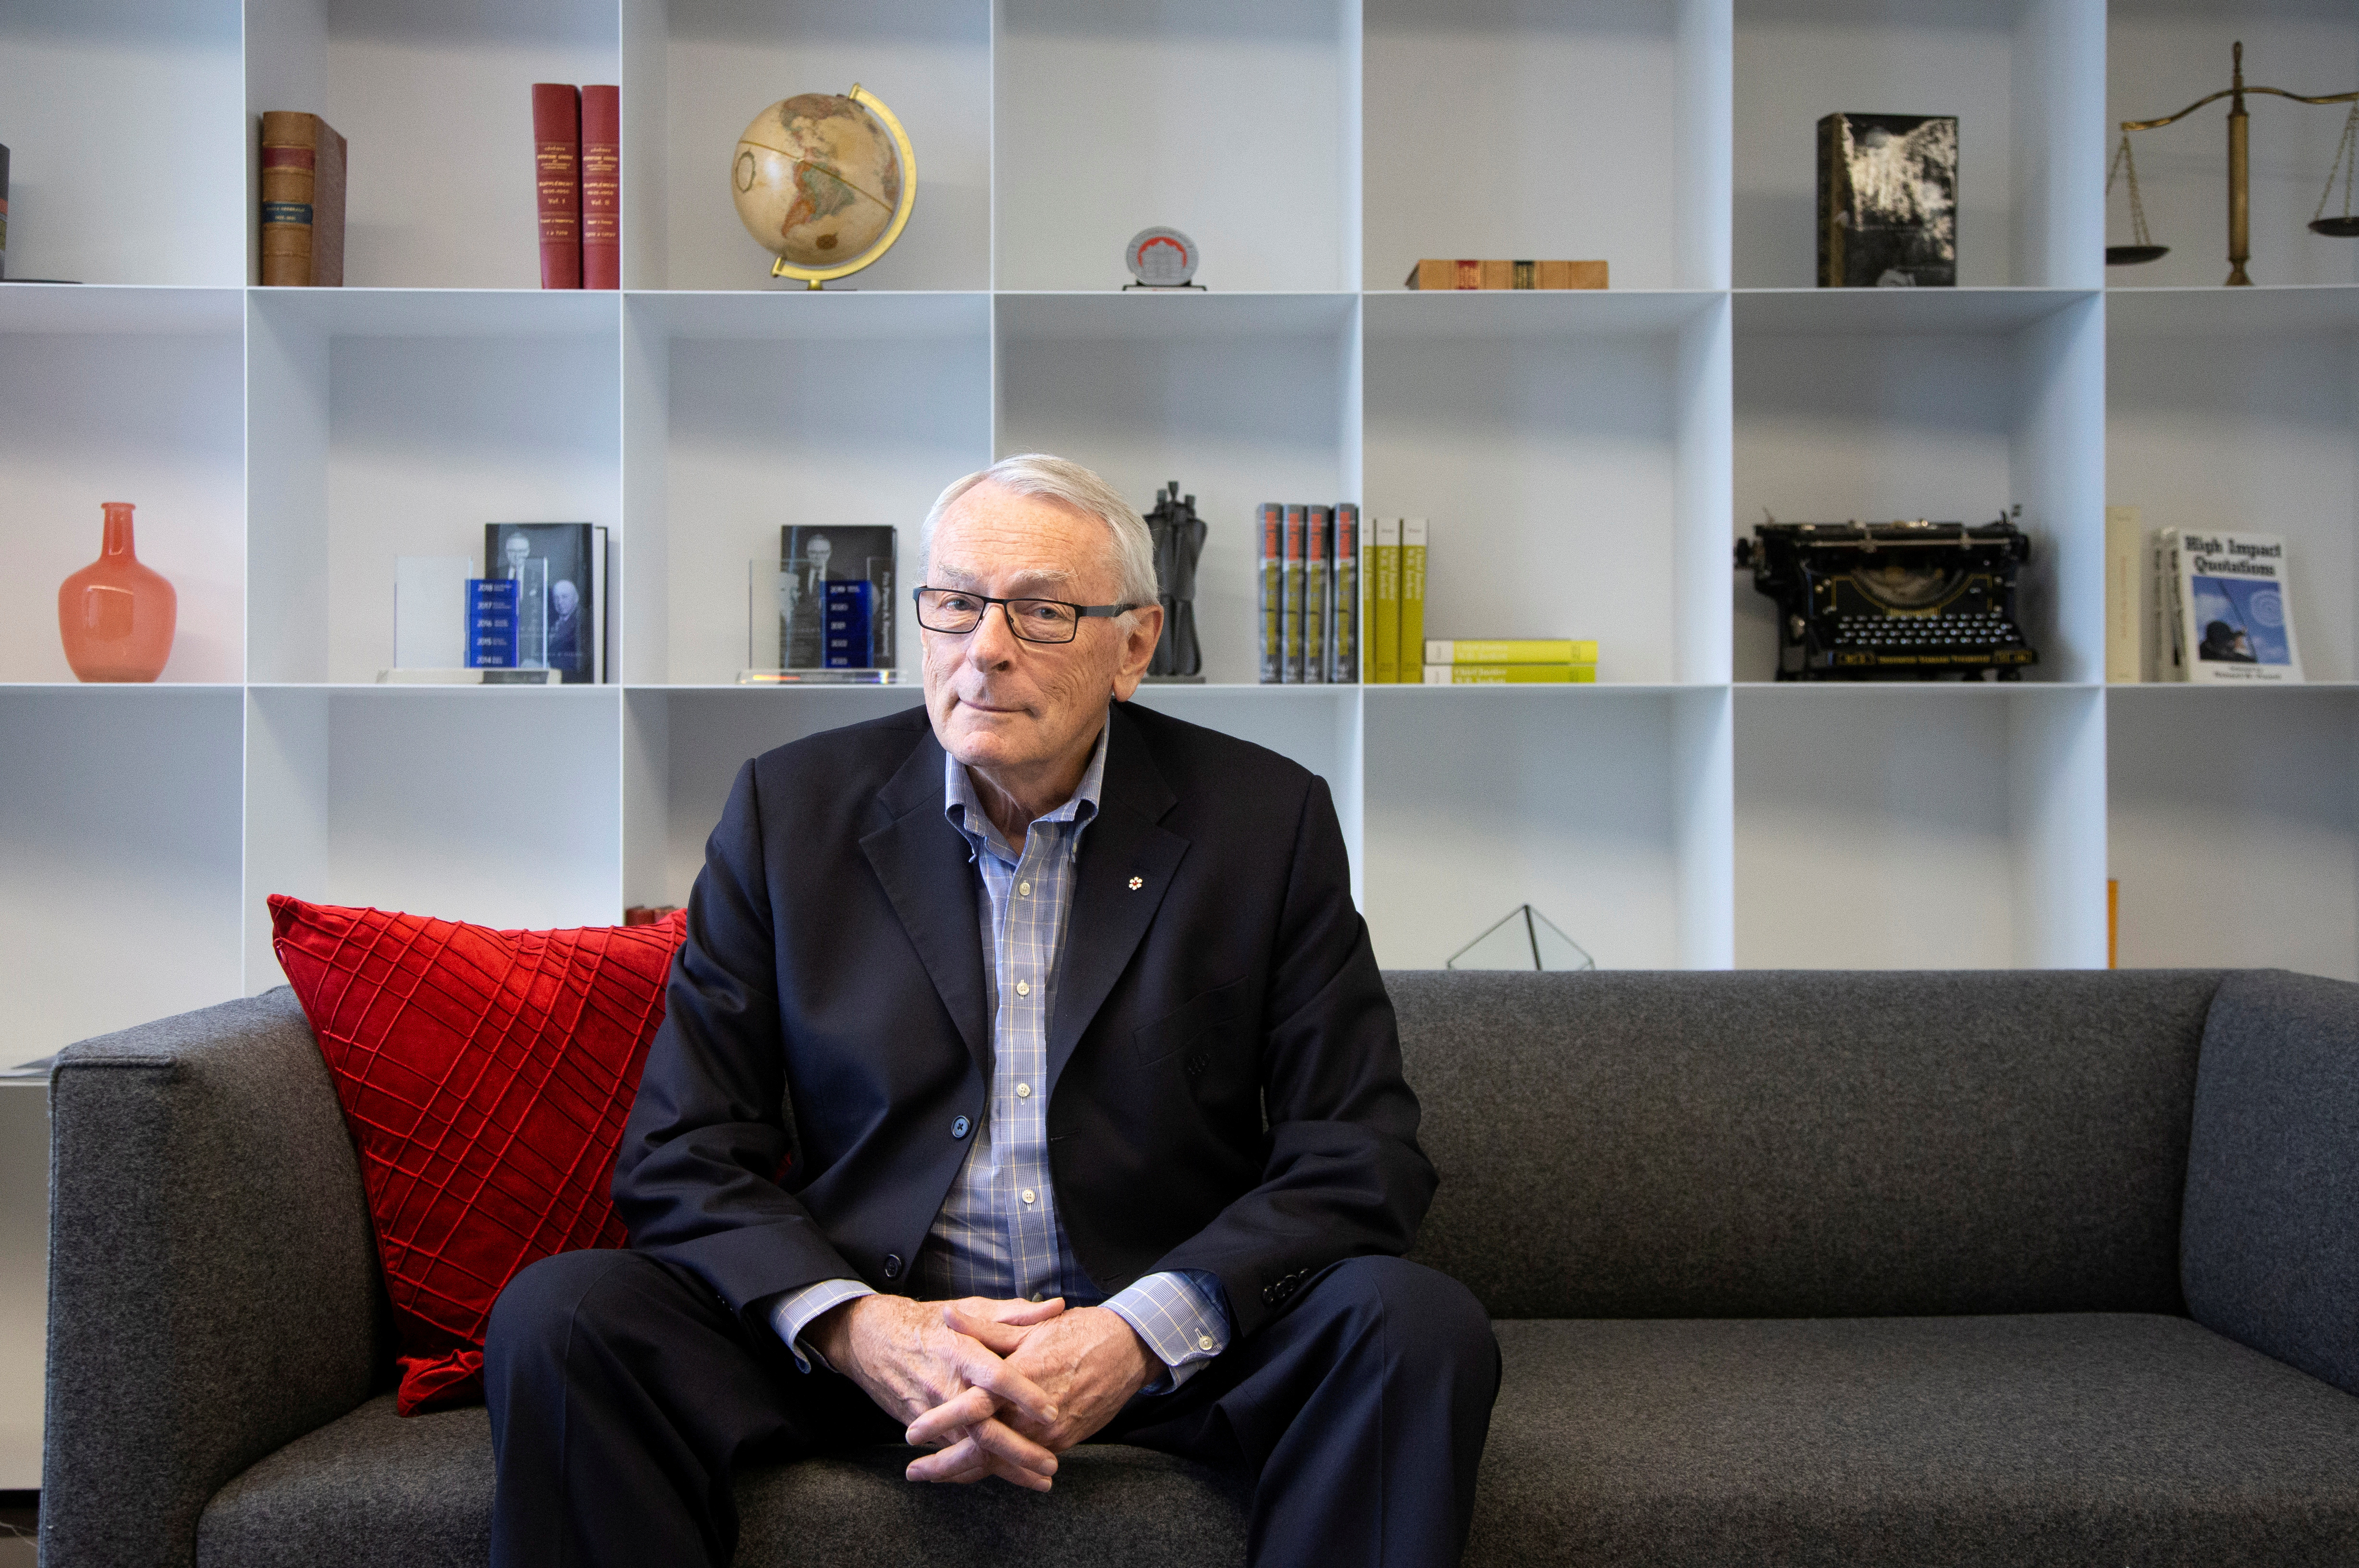 FILE PHOTO: International Olympic Committee (IOC) member Dick Pound, poses in his offices in Montreal, Quebec, Canada February 26, 2020.  REUTERS/Christinne Muschi/File Photo